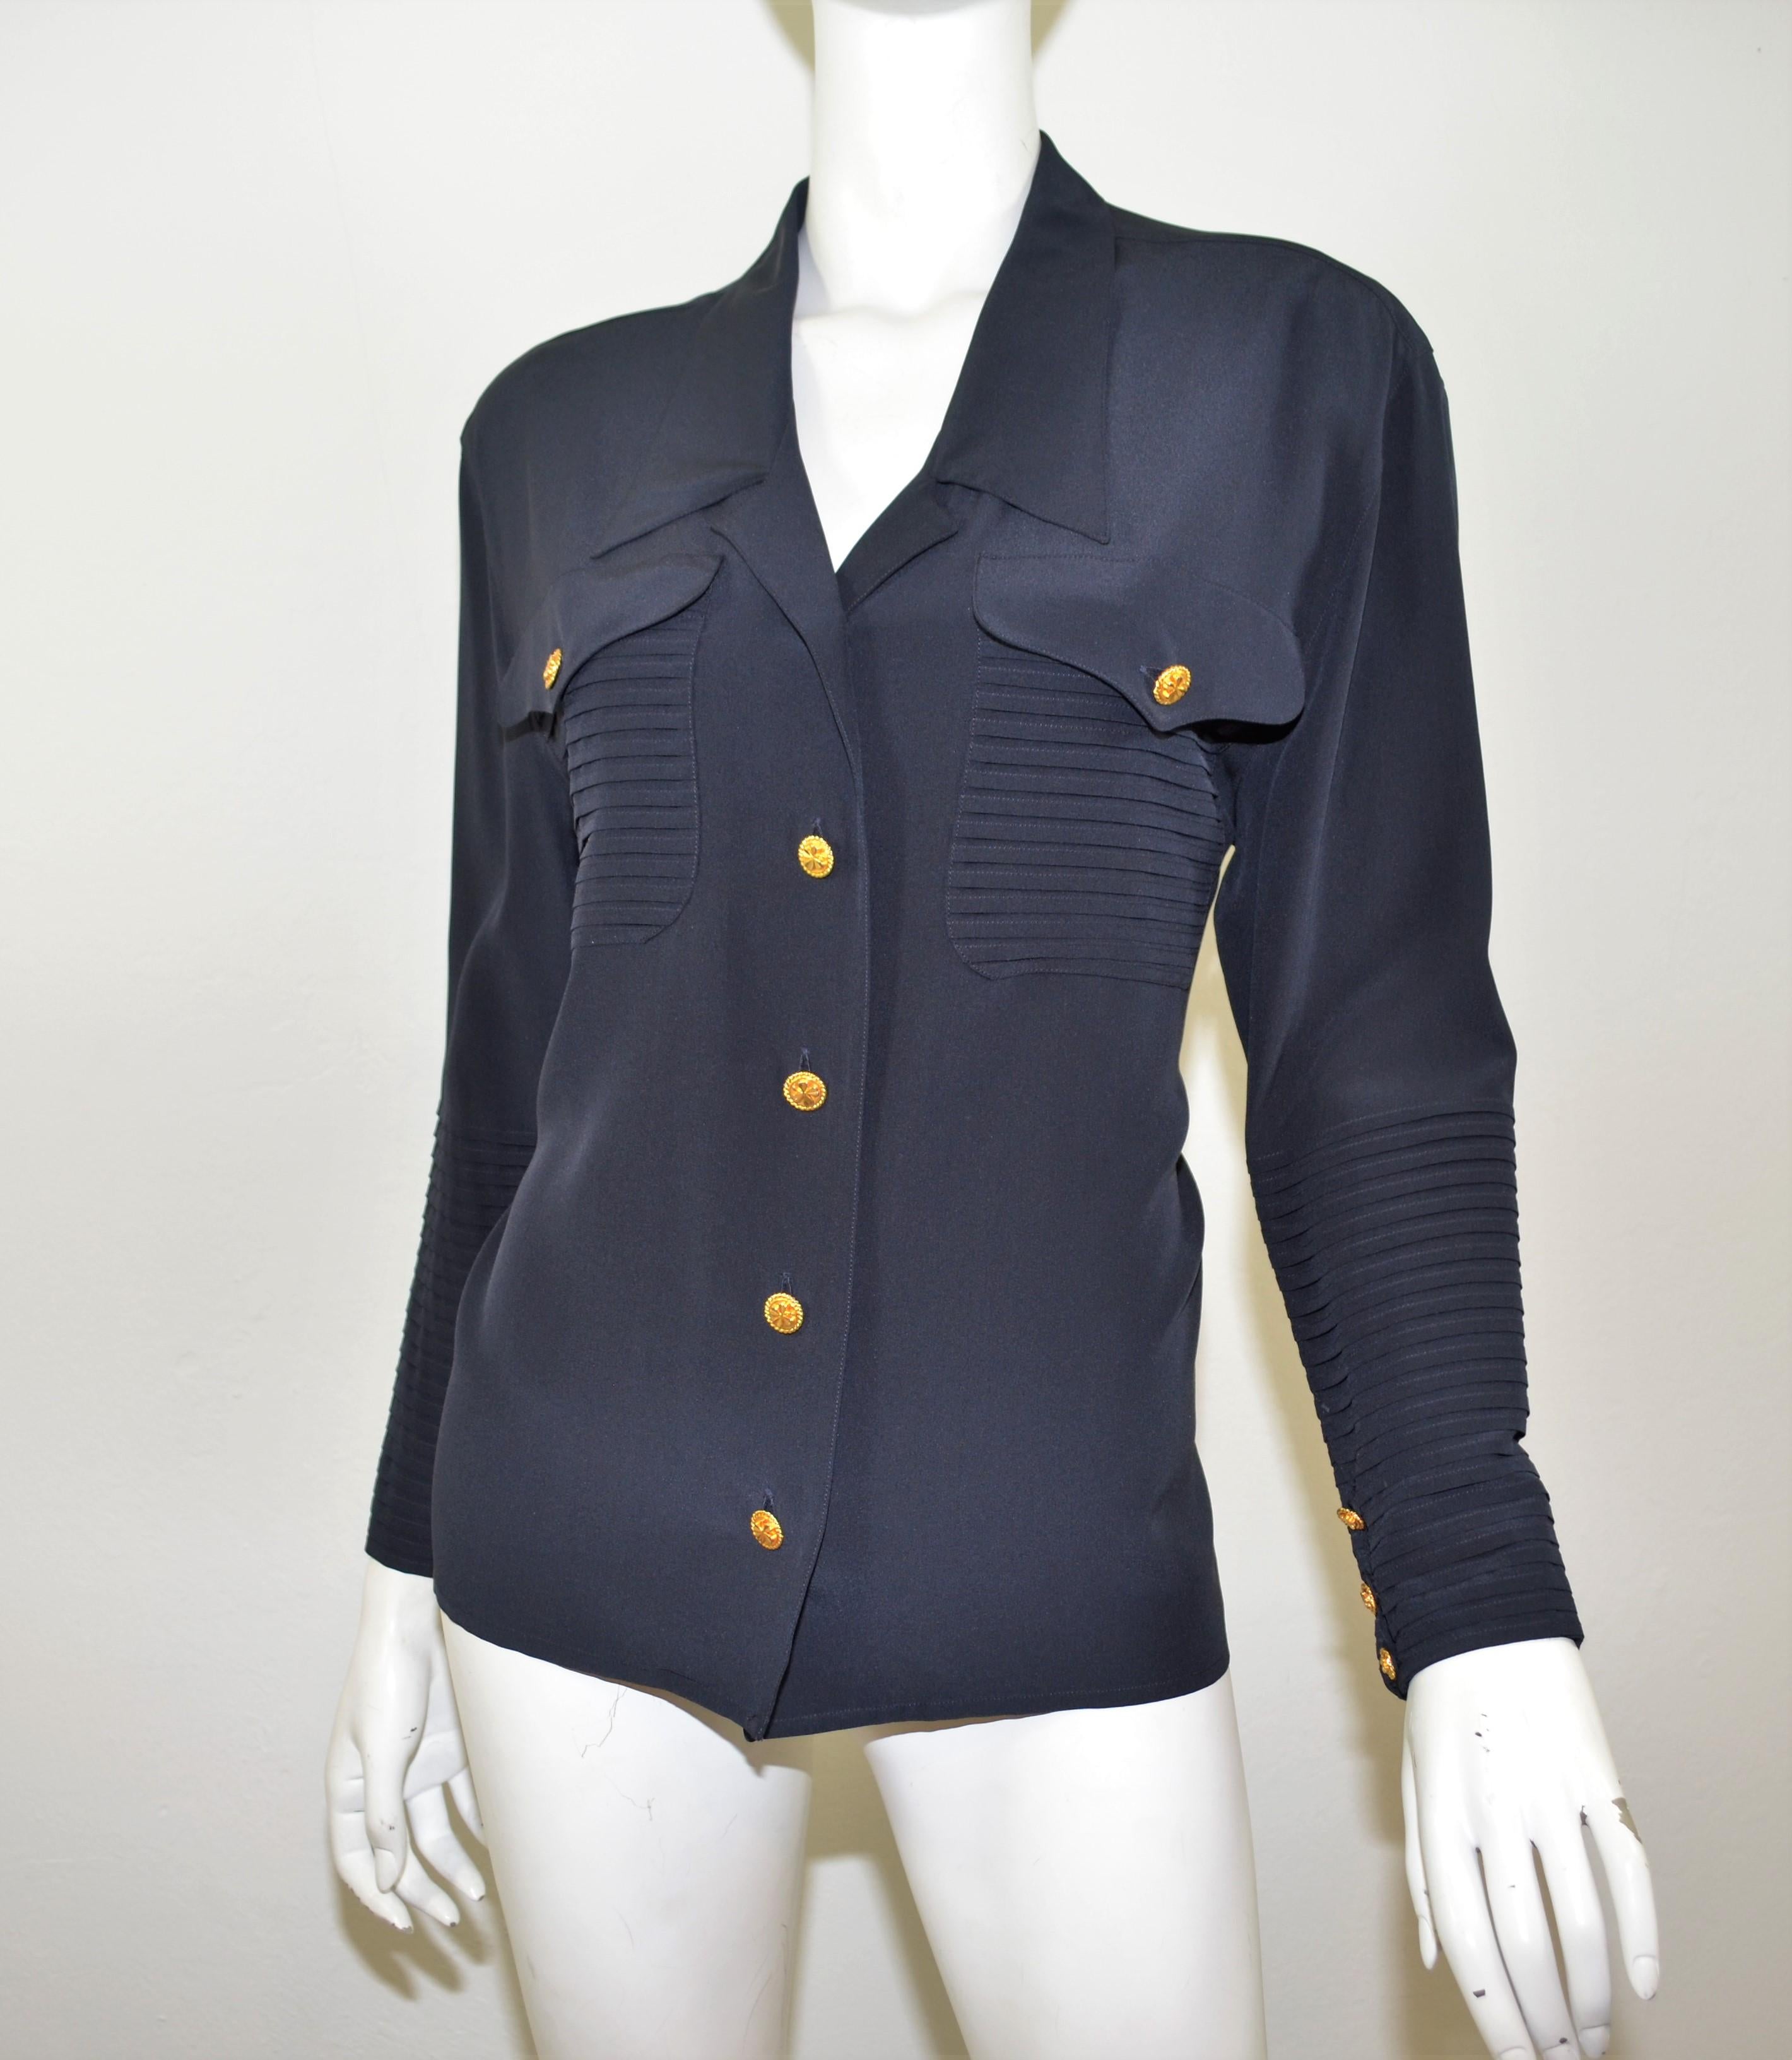 Vintage Chanel blouse featured in a navy blue with gold-tone clover button fastenings along the front and at the pockets. Blouse has a pintucked design along the patch pockets, sleeves, and back. excellent vintage condition.

Bust 40'', sleeves